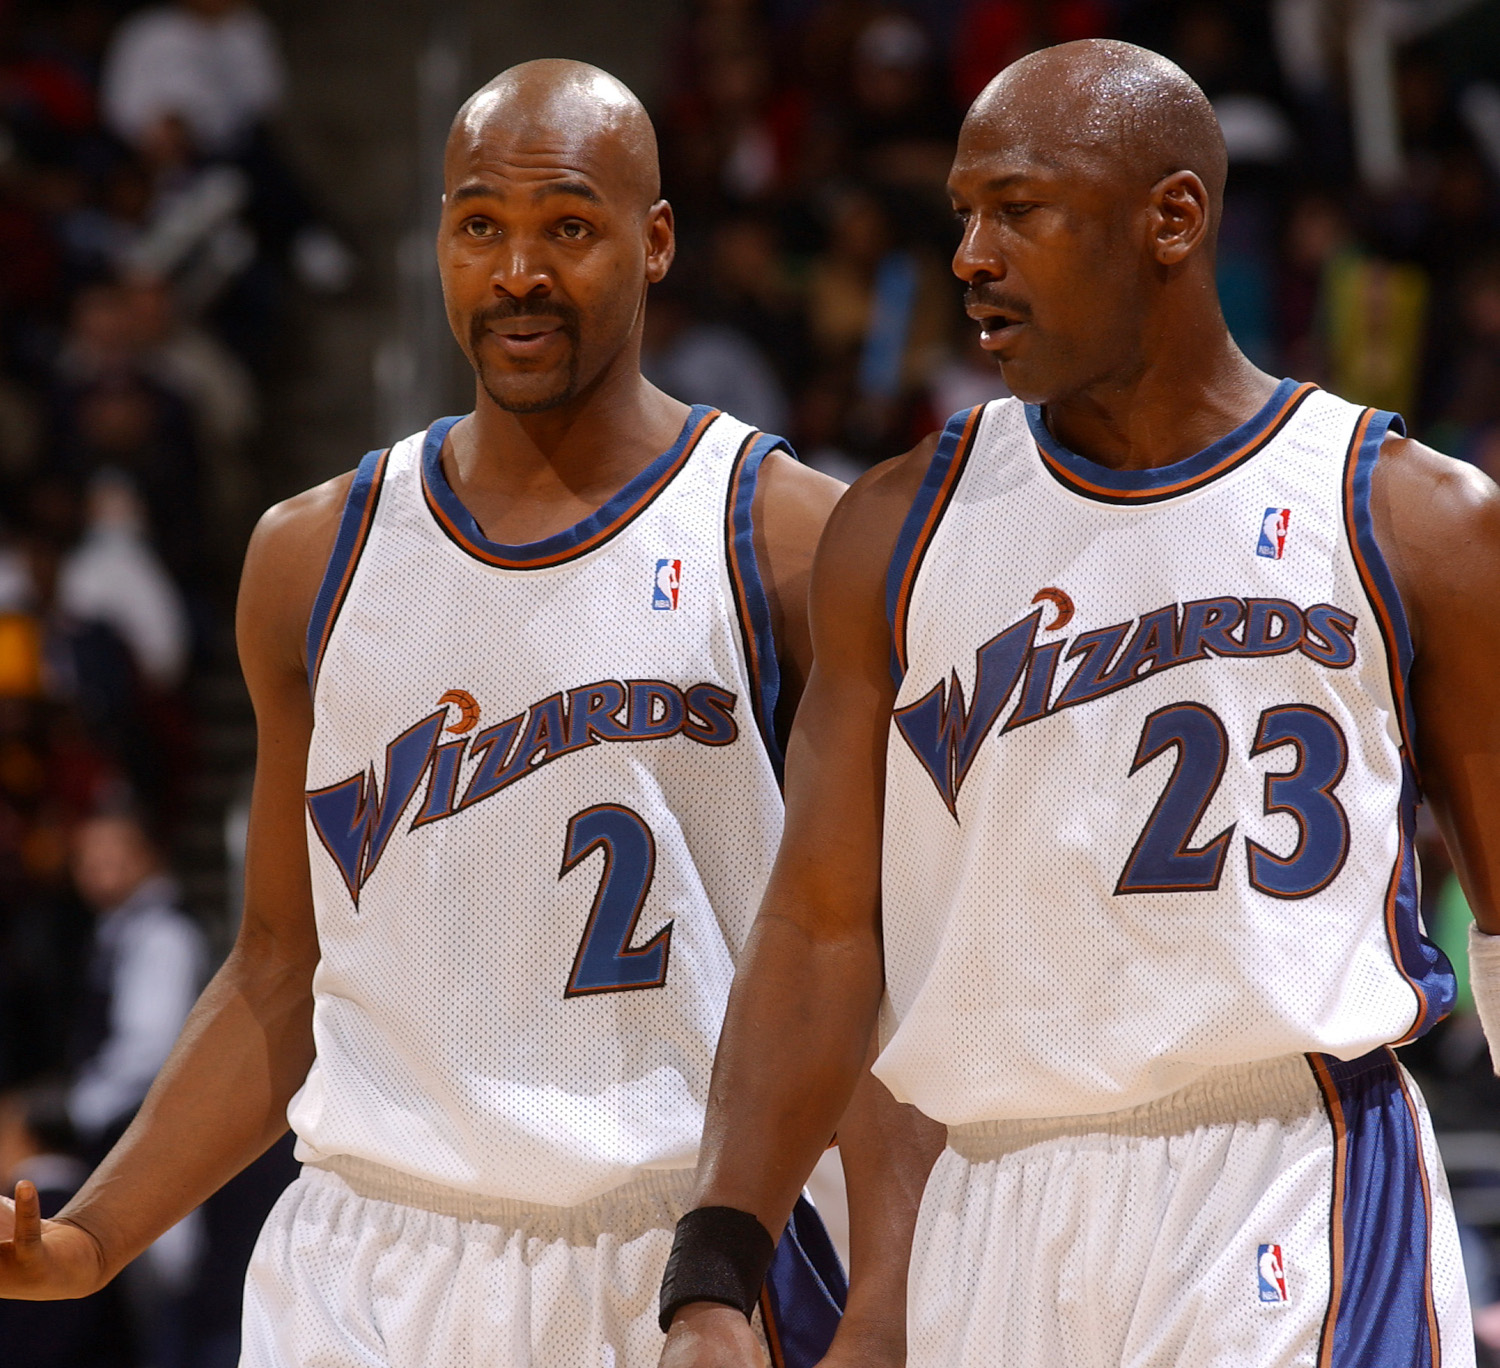 Michael Jordan and Bryon Russell of the Washington Wizards in 2002